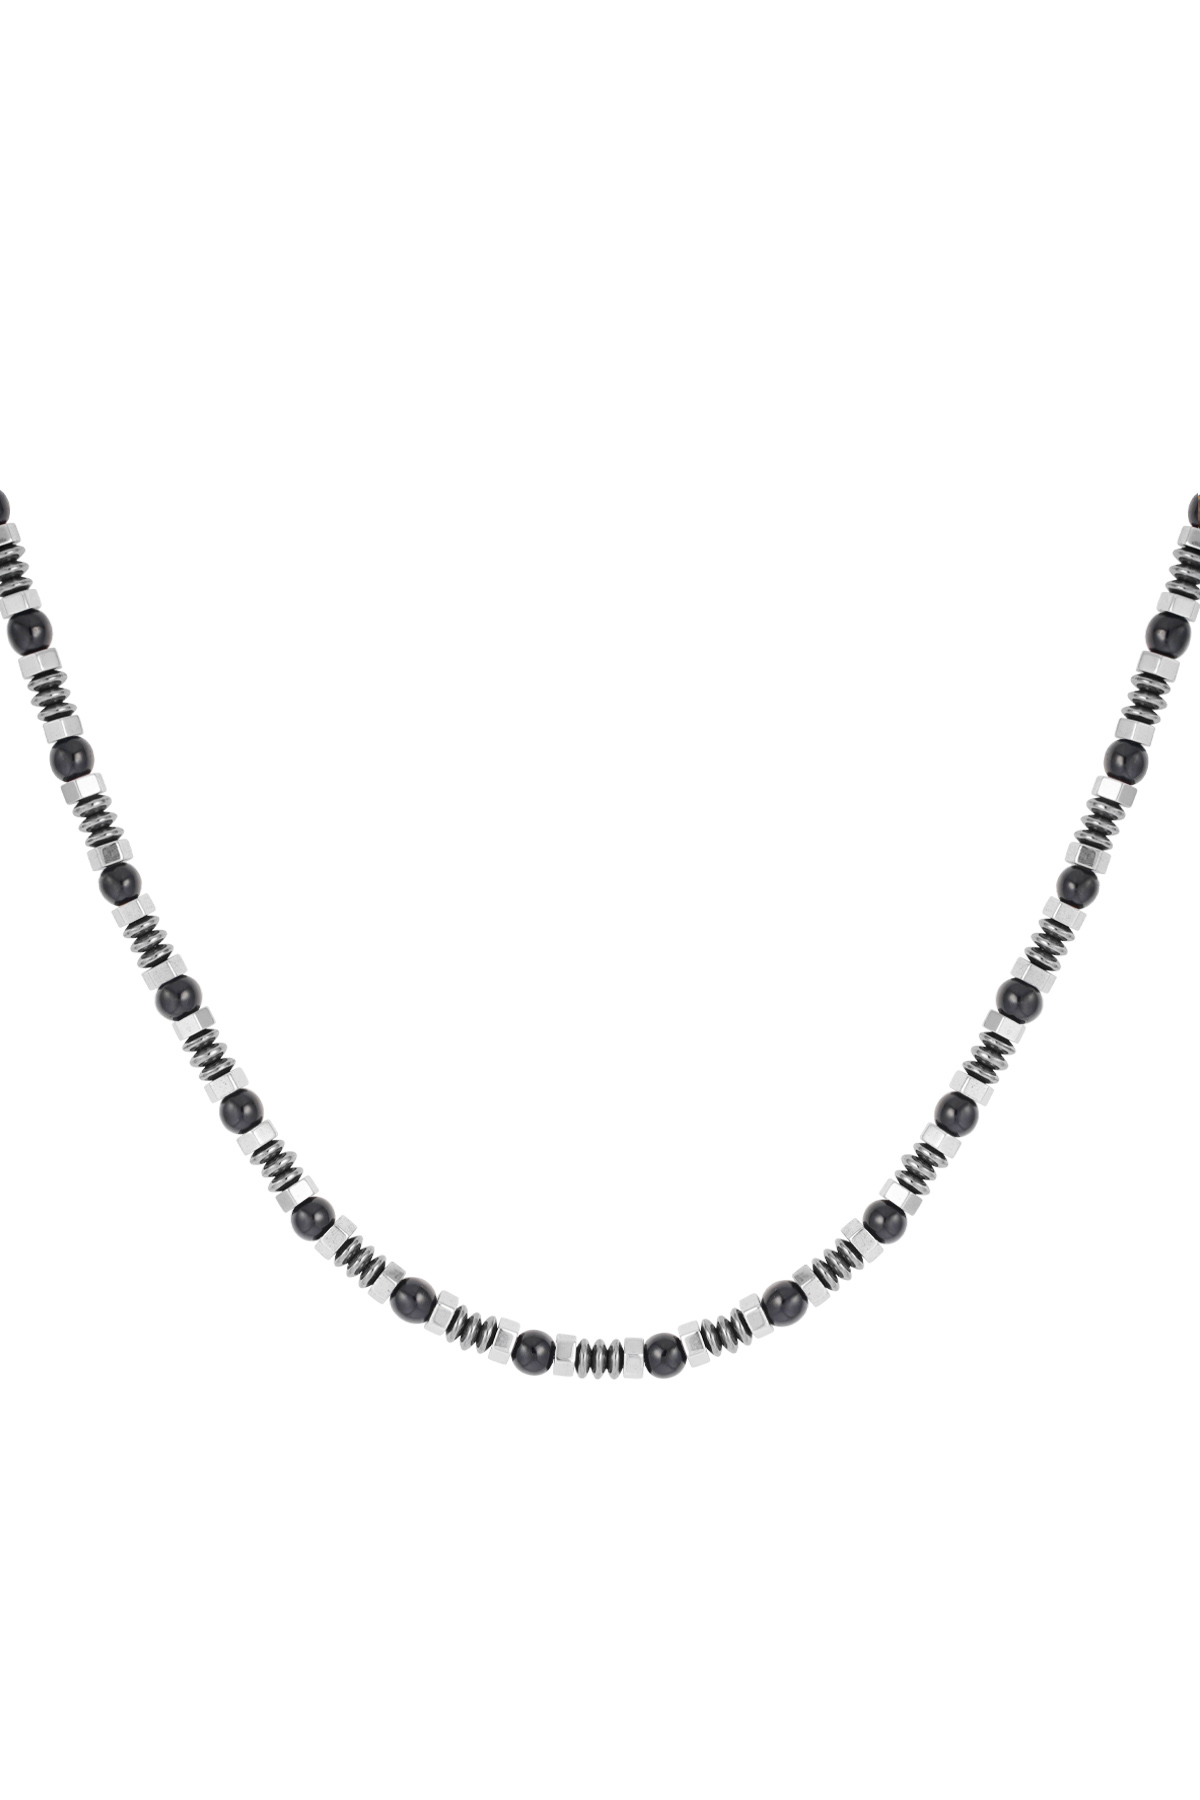 Men's necklace with charms and beads - black/silver 